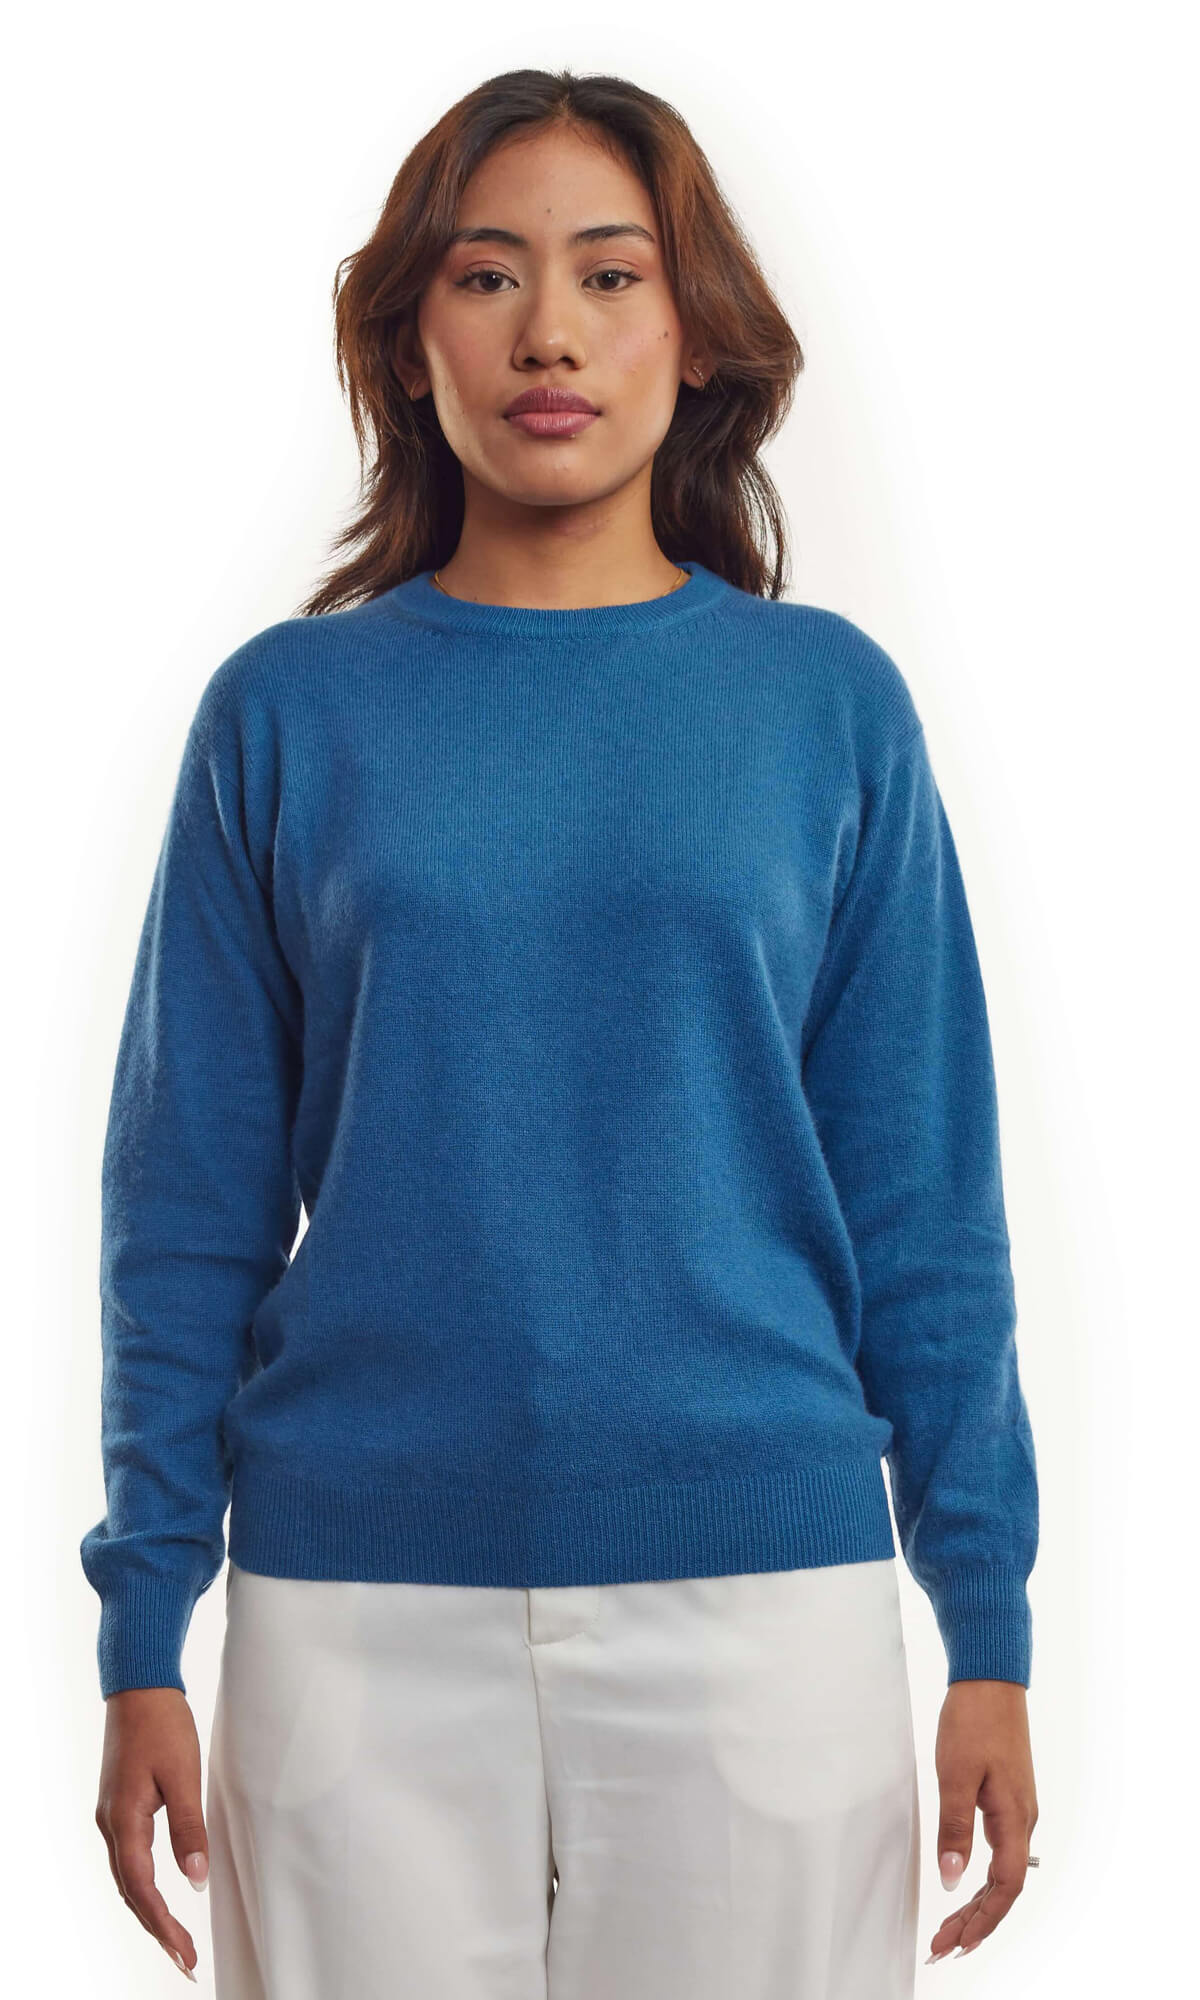 Sapphire Sky Pure Cashmere Cardigan Long Sleeve Pullover